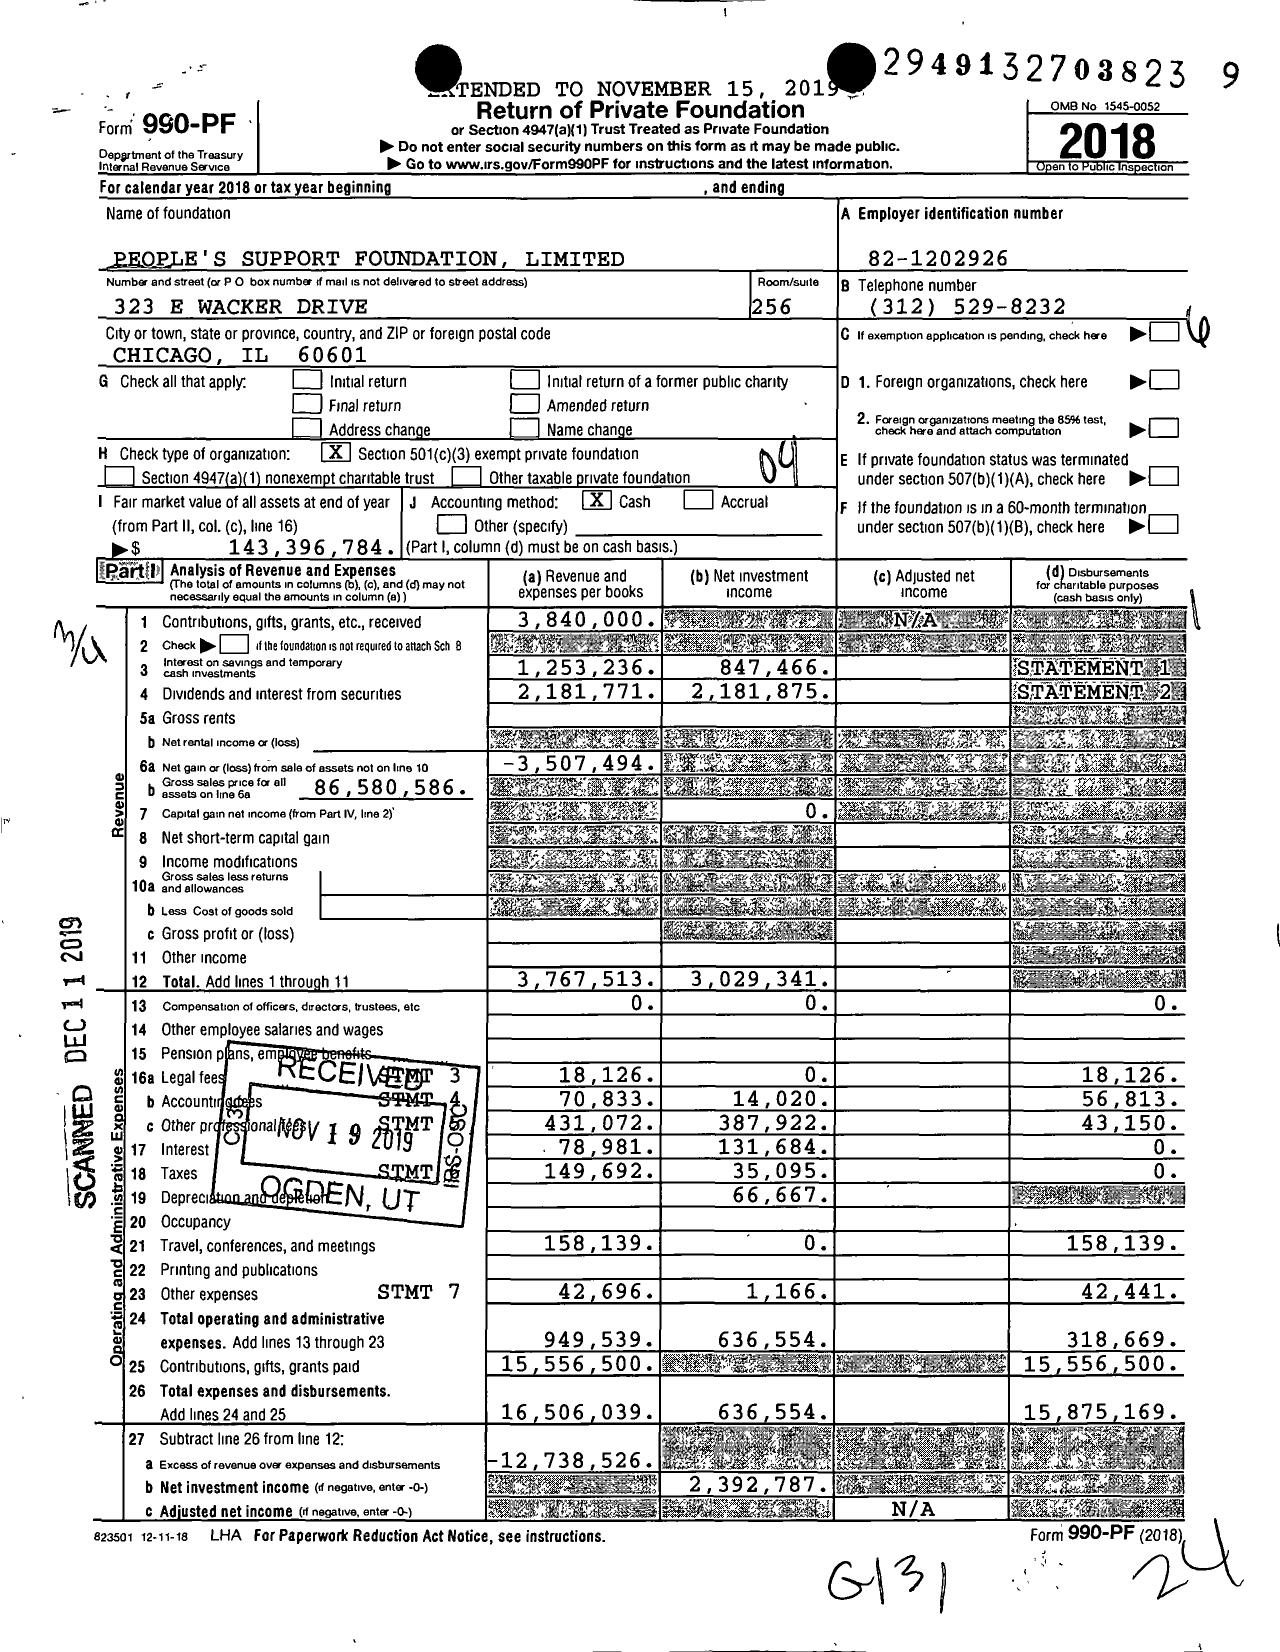 Image of first page of 2018 Form 990PF for People's Support Foundation Limited